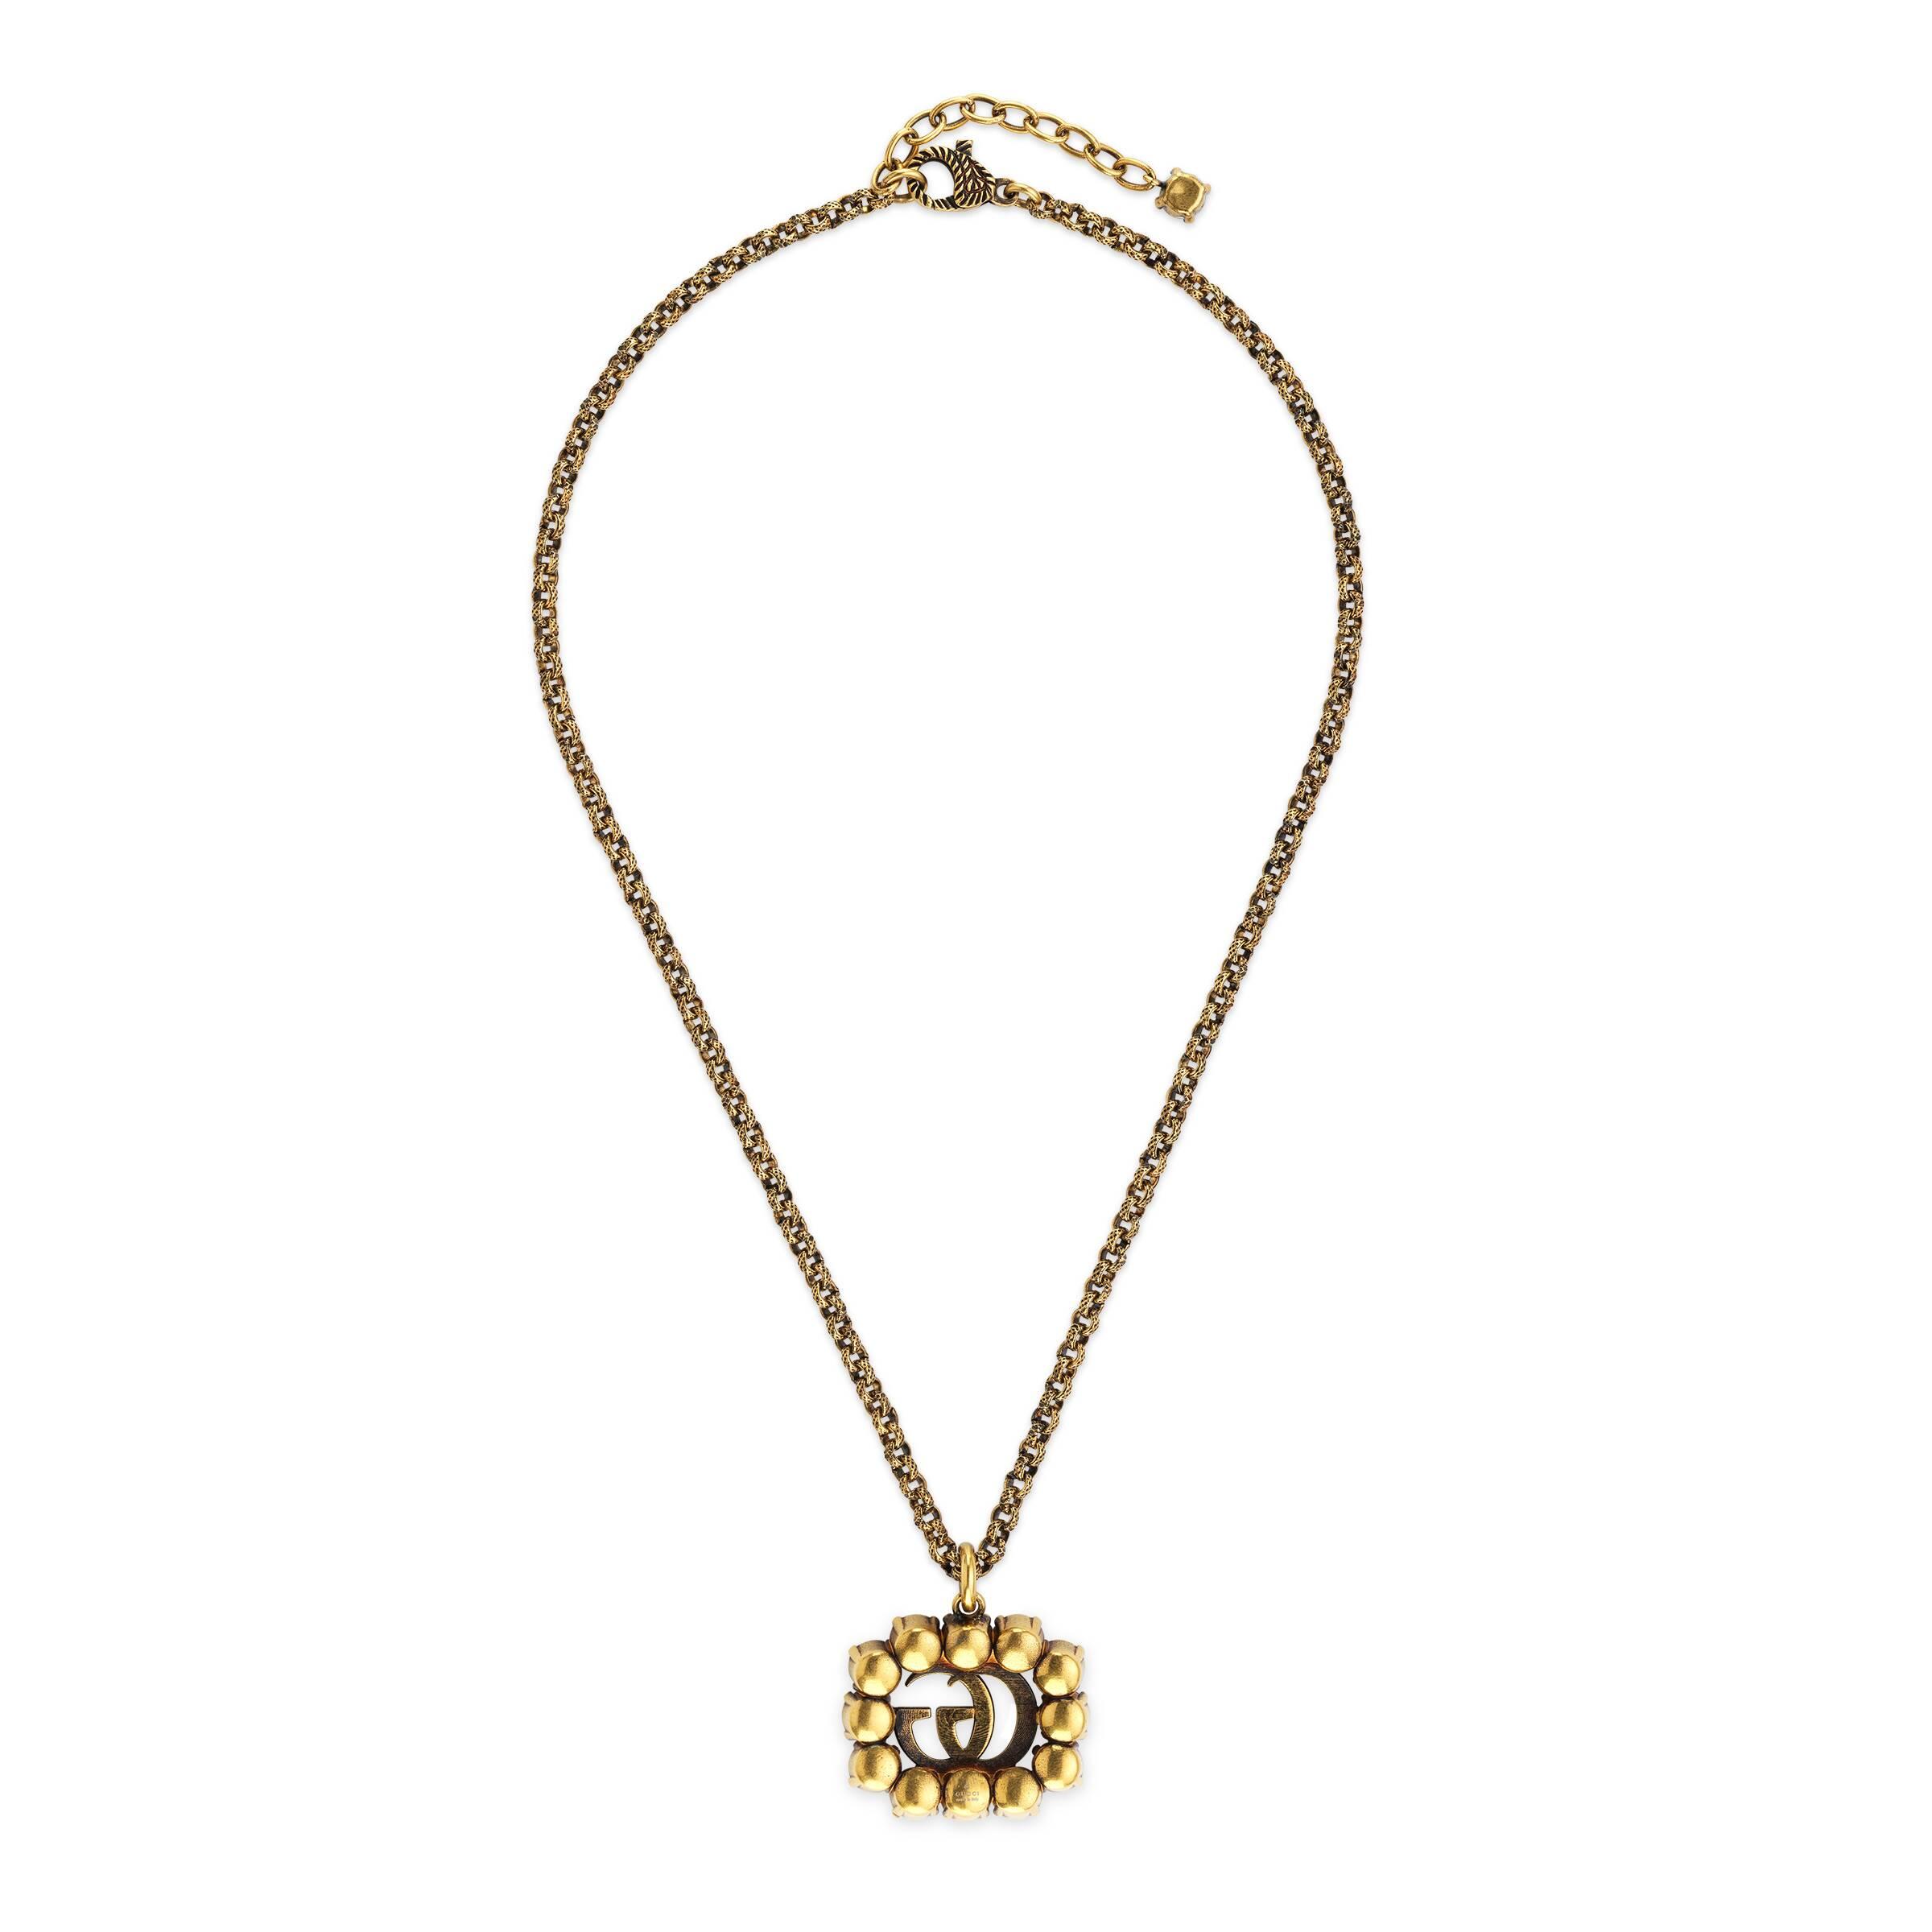 Gucci Crystal Double G Necklace in Metallic - Lyst